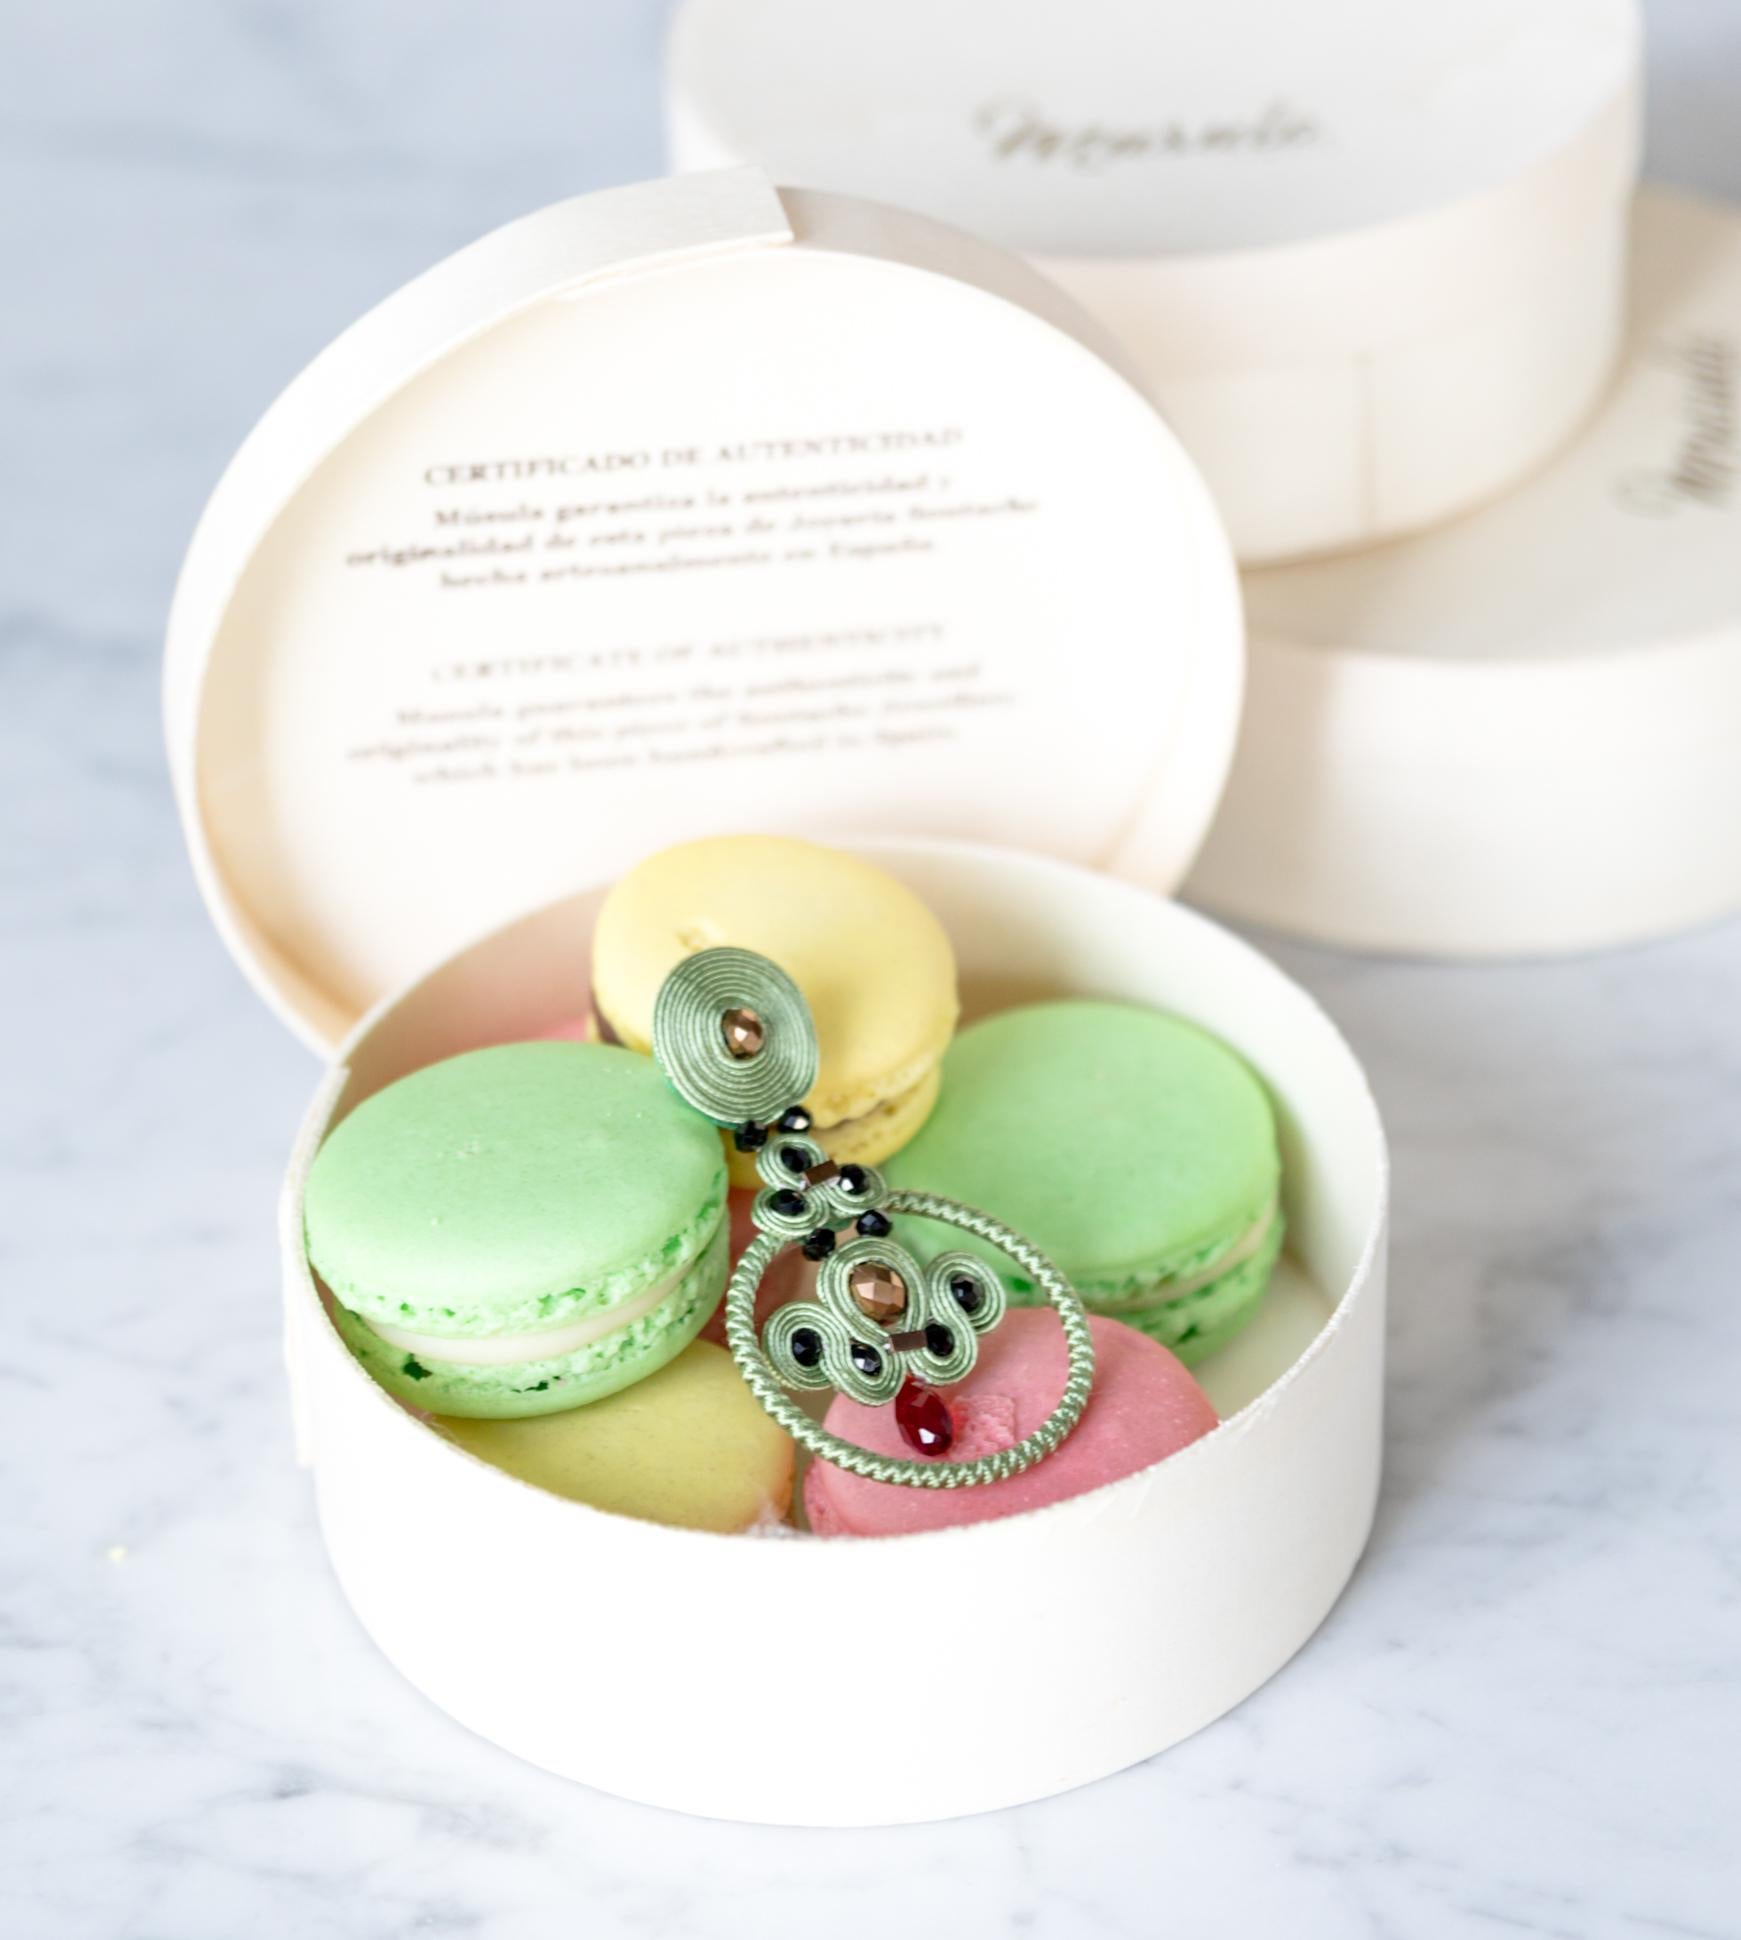 Musula La Patisserie Macarons Pistache Earrings
La Patisserie Collection is a special homage to sweet lovers
Musula in the Fall collection 2021 wants  to pay tribute to the sweet and delicate Pastry world. Pastries have been always a must at our